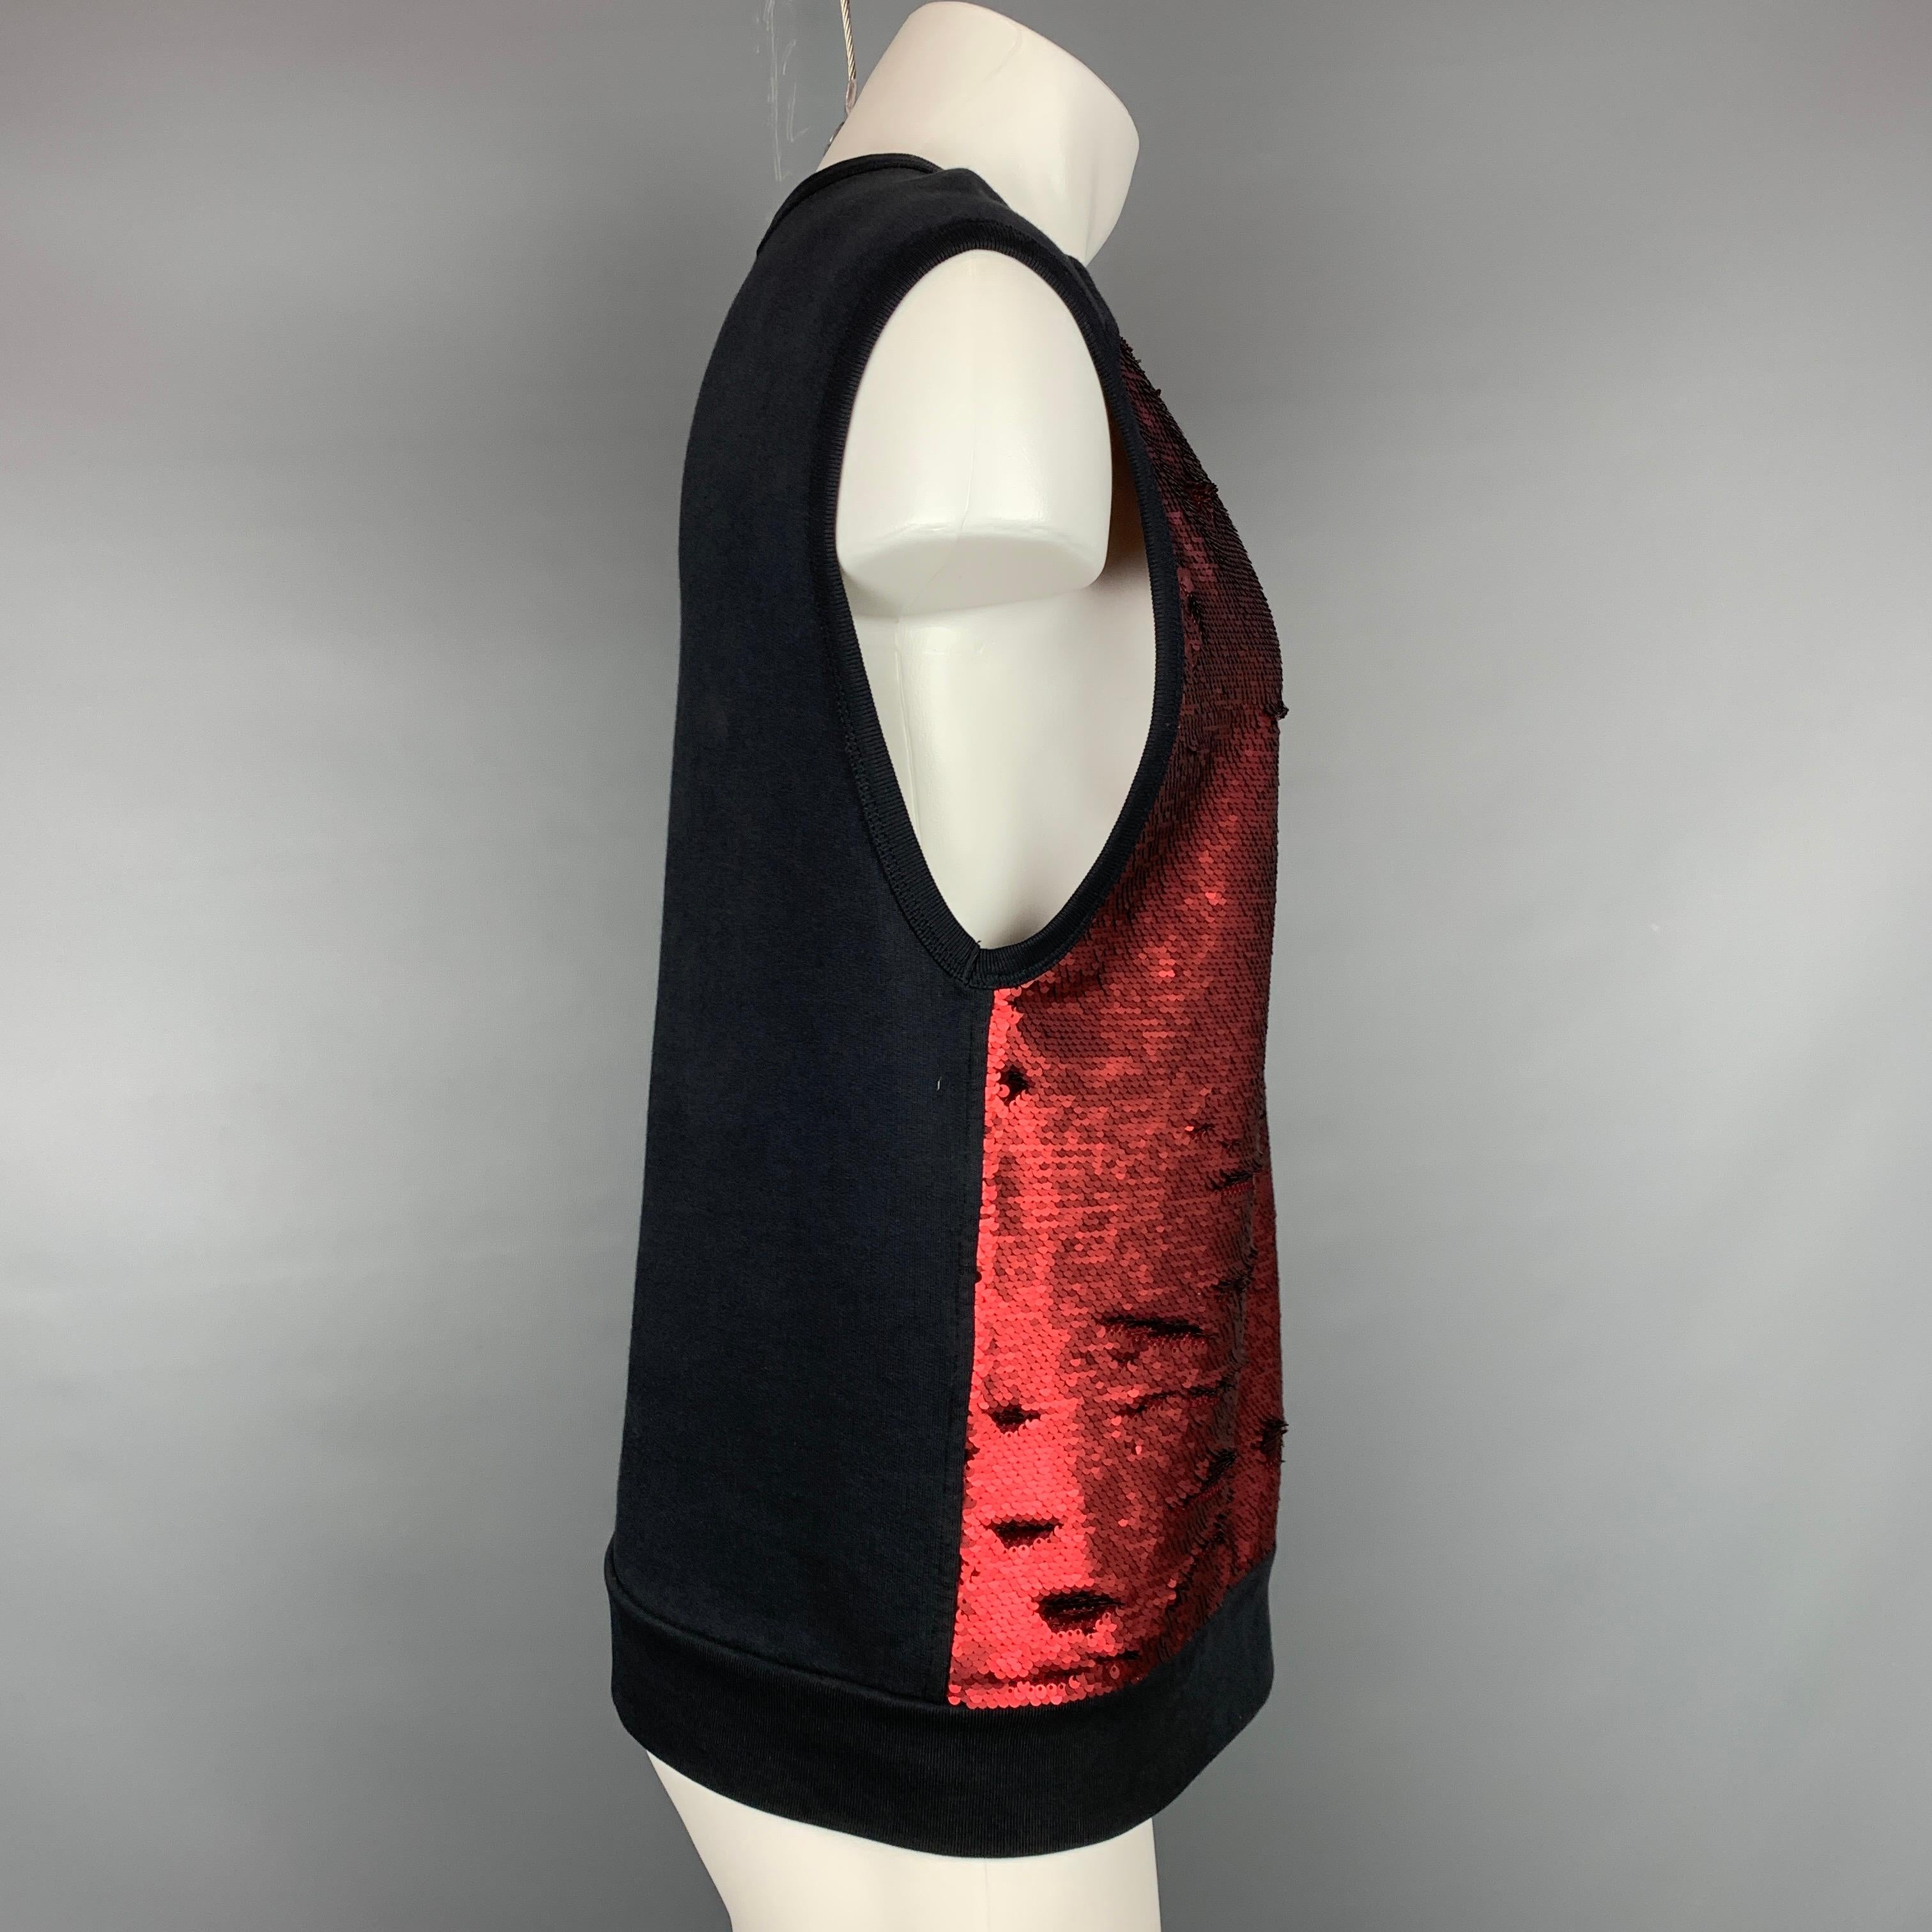 DRIES VAN NOTEN S/S 16 vest comes in a red & black sequined cotton / polyester featuring a crew-neck. 

Very Good Pre-Owned Condition.
Marked: M

Measurements:

Shoulder: 19 in.
Chest: 42 in.
Length: 25 in. 